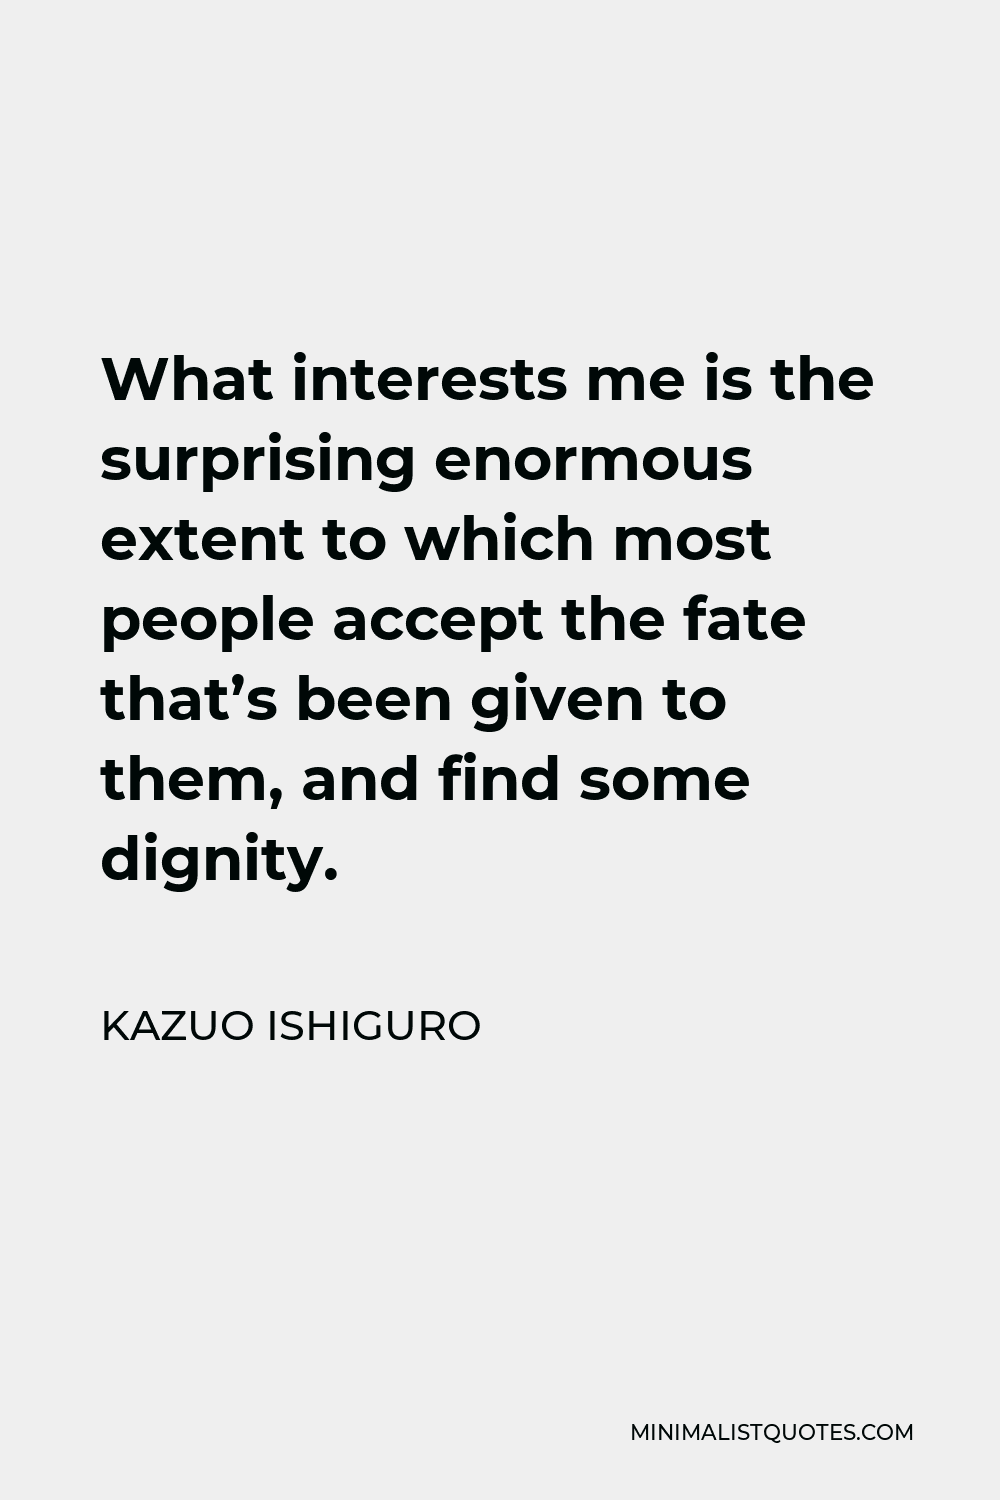 Kazuo Ishiguro Quote - What interests me is the surprising enormous extent to which most people accept the fate that’s been given to them, and find some dignity.